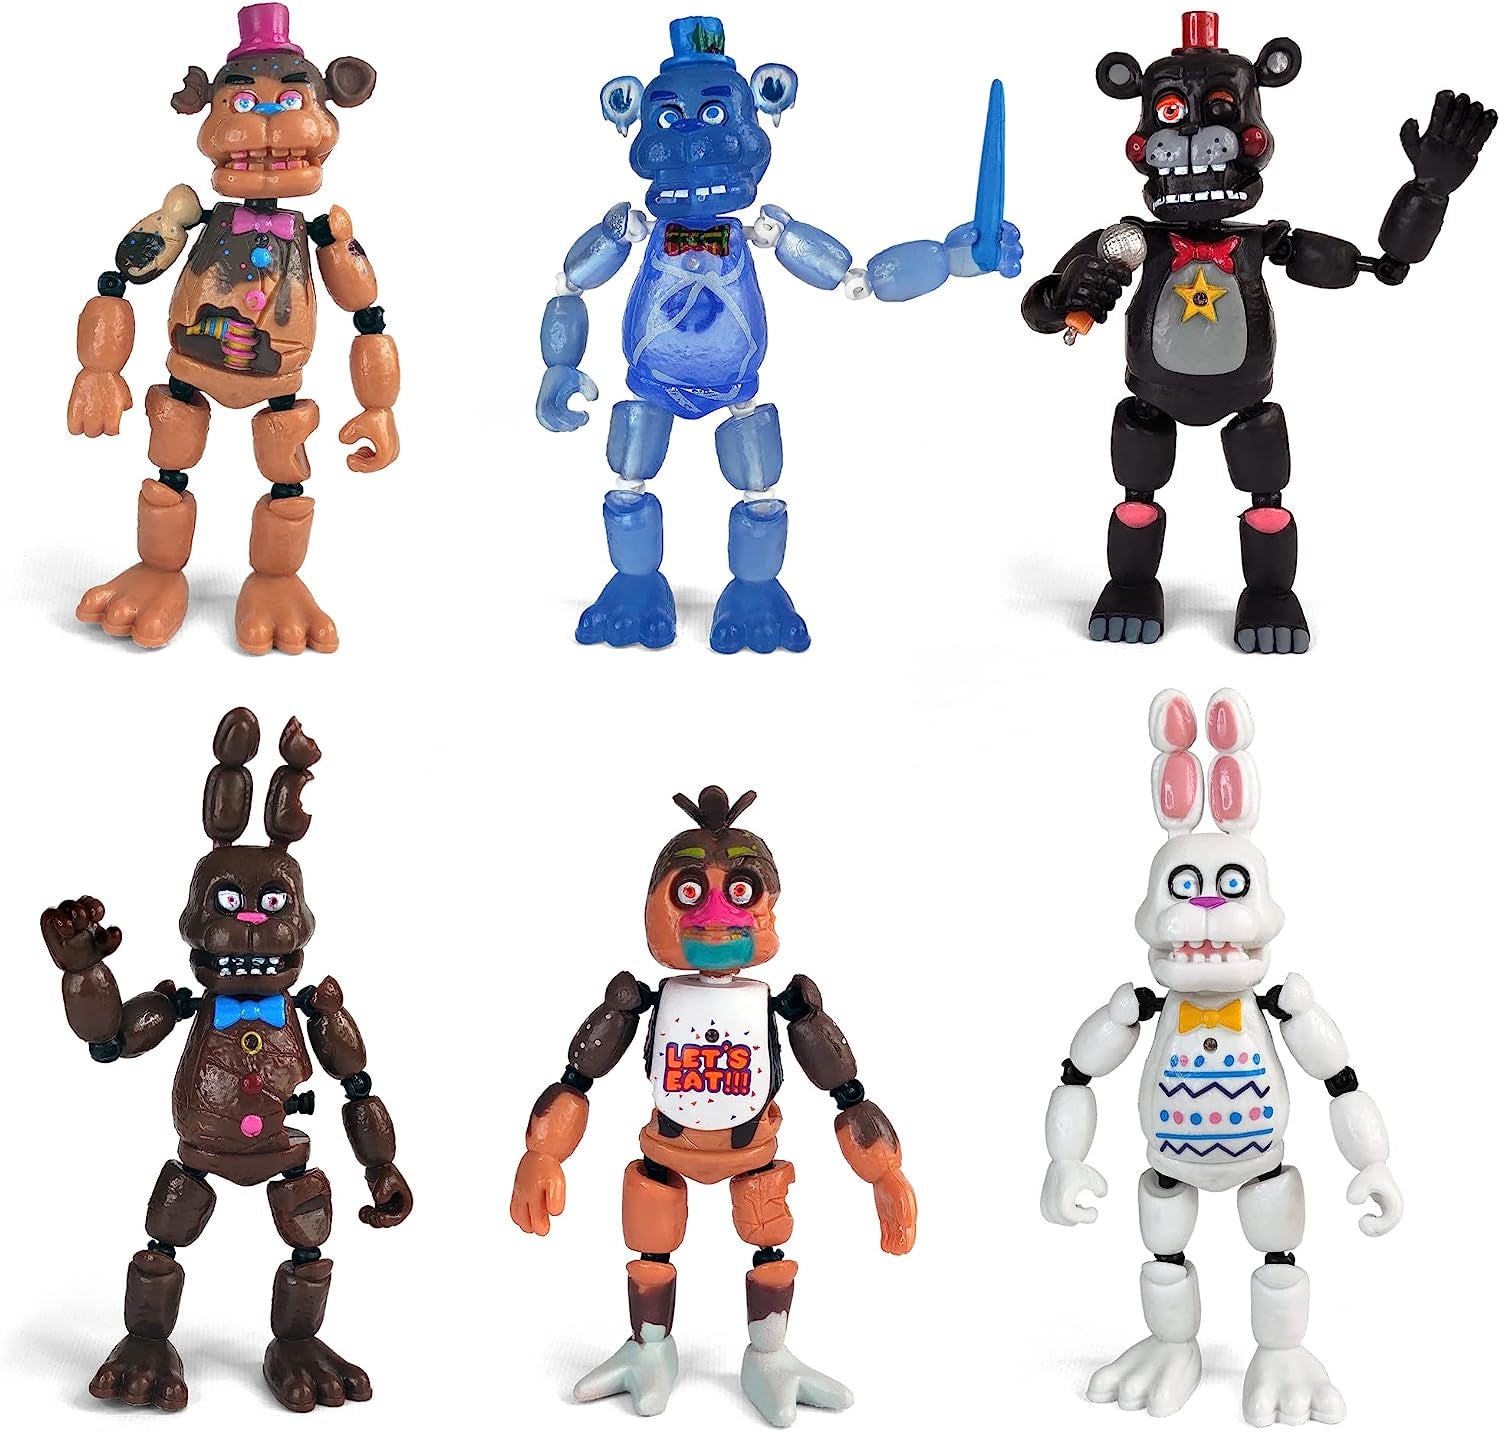 Inspired by Five Nights at Freddys | Chocolate | Freddy'S Action Figures Toys (FNAF) Set of 6 Pcs [Rockstar & Chocolate Freddy, Bonnie, Chica, Easter, Freddy Frostbear]